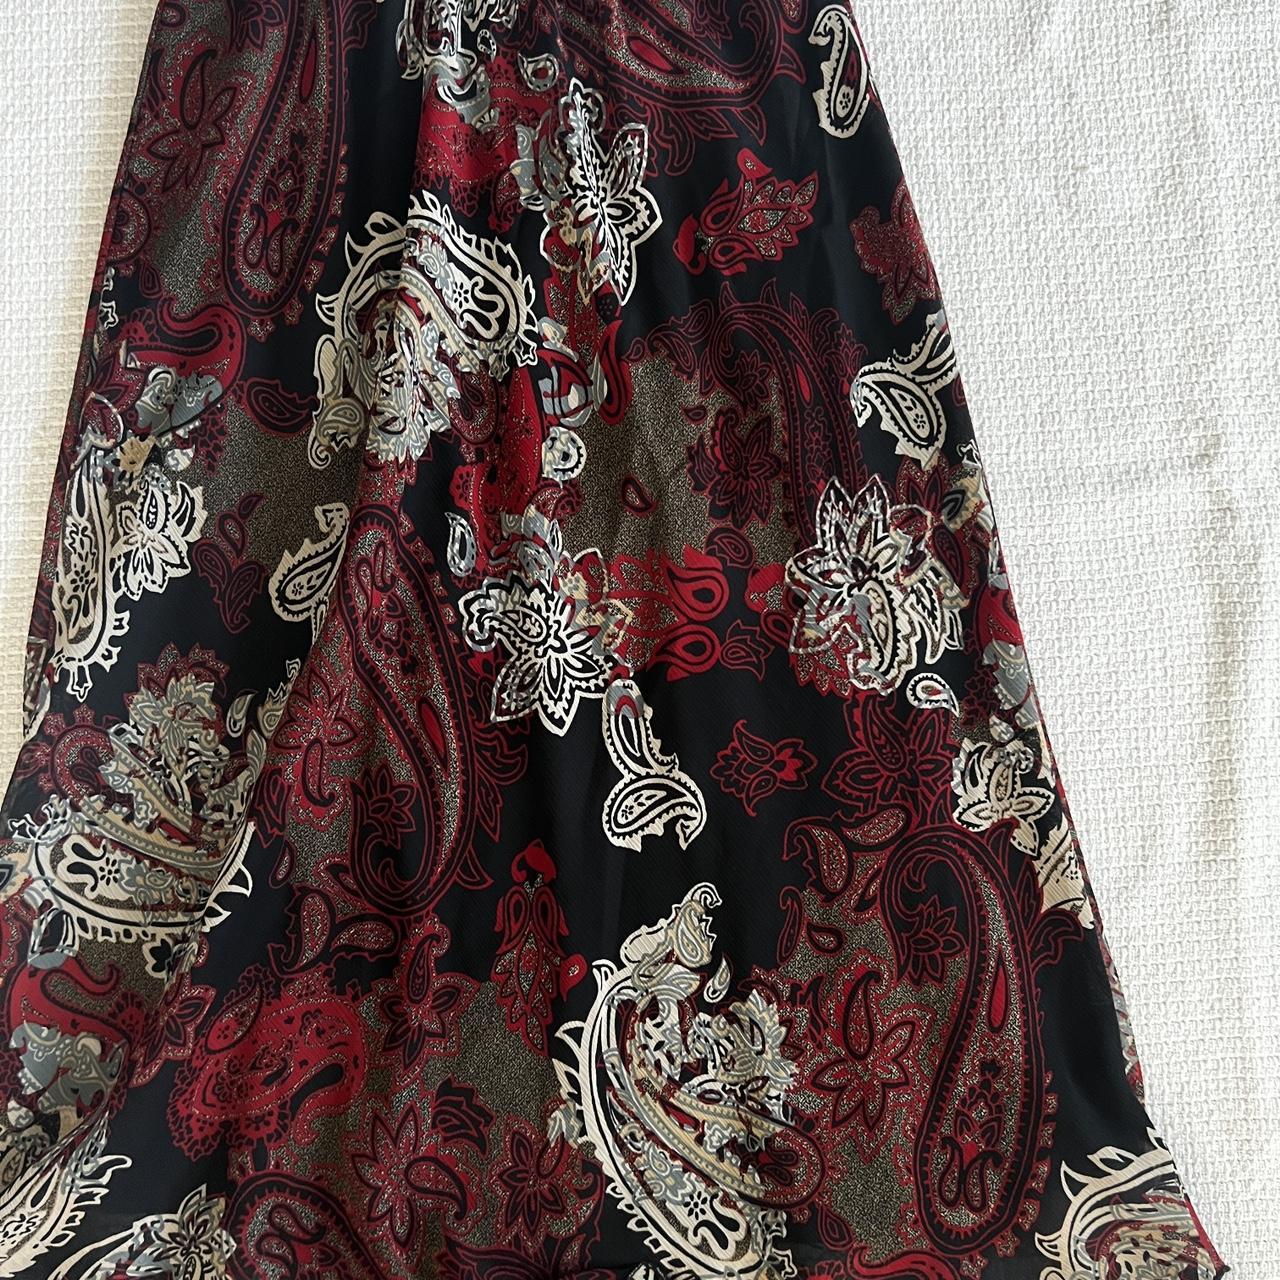 American Vintage Women's Black and Red Skirt (2)